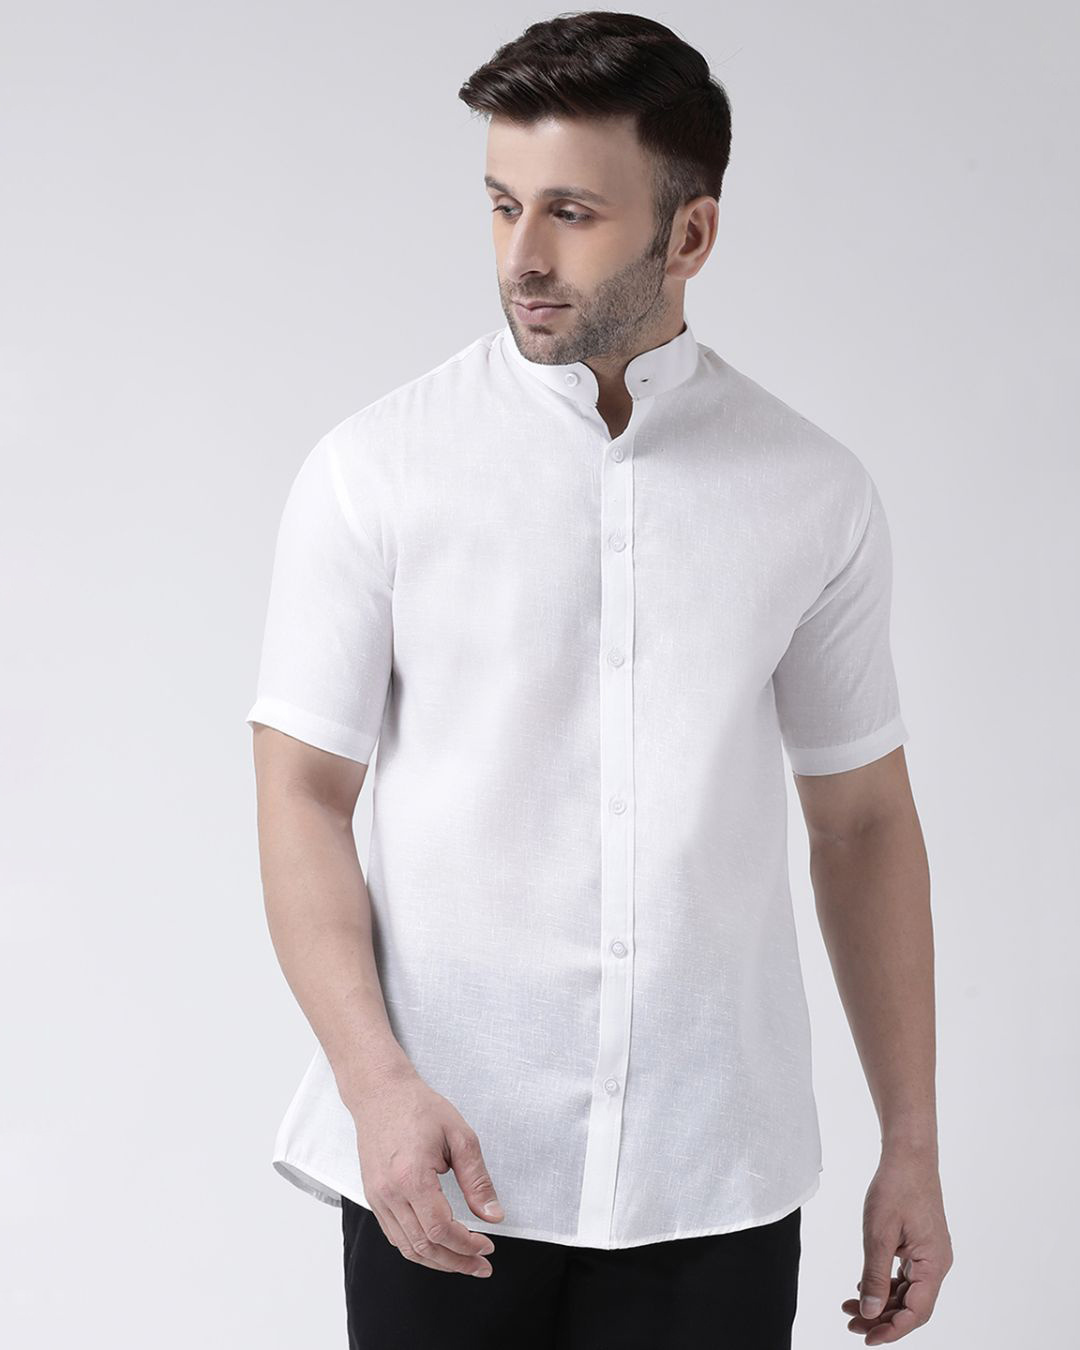 Buy Riag Half Sleeves Cotton Casual Chinese Neck Shirt Online at Bewakoof